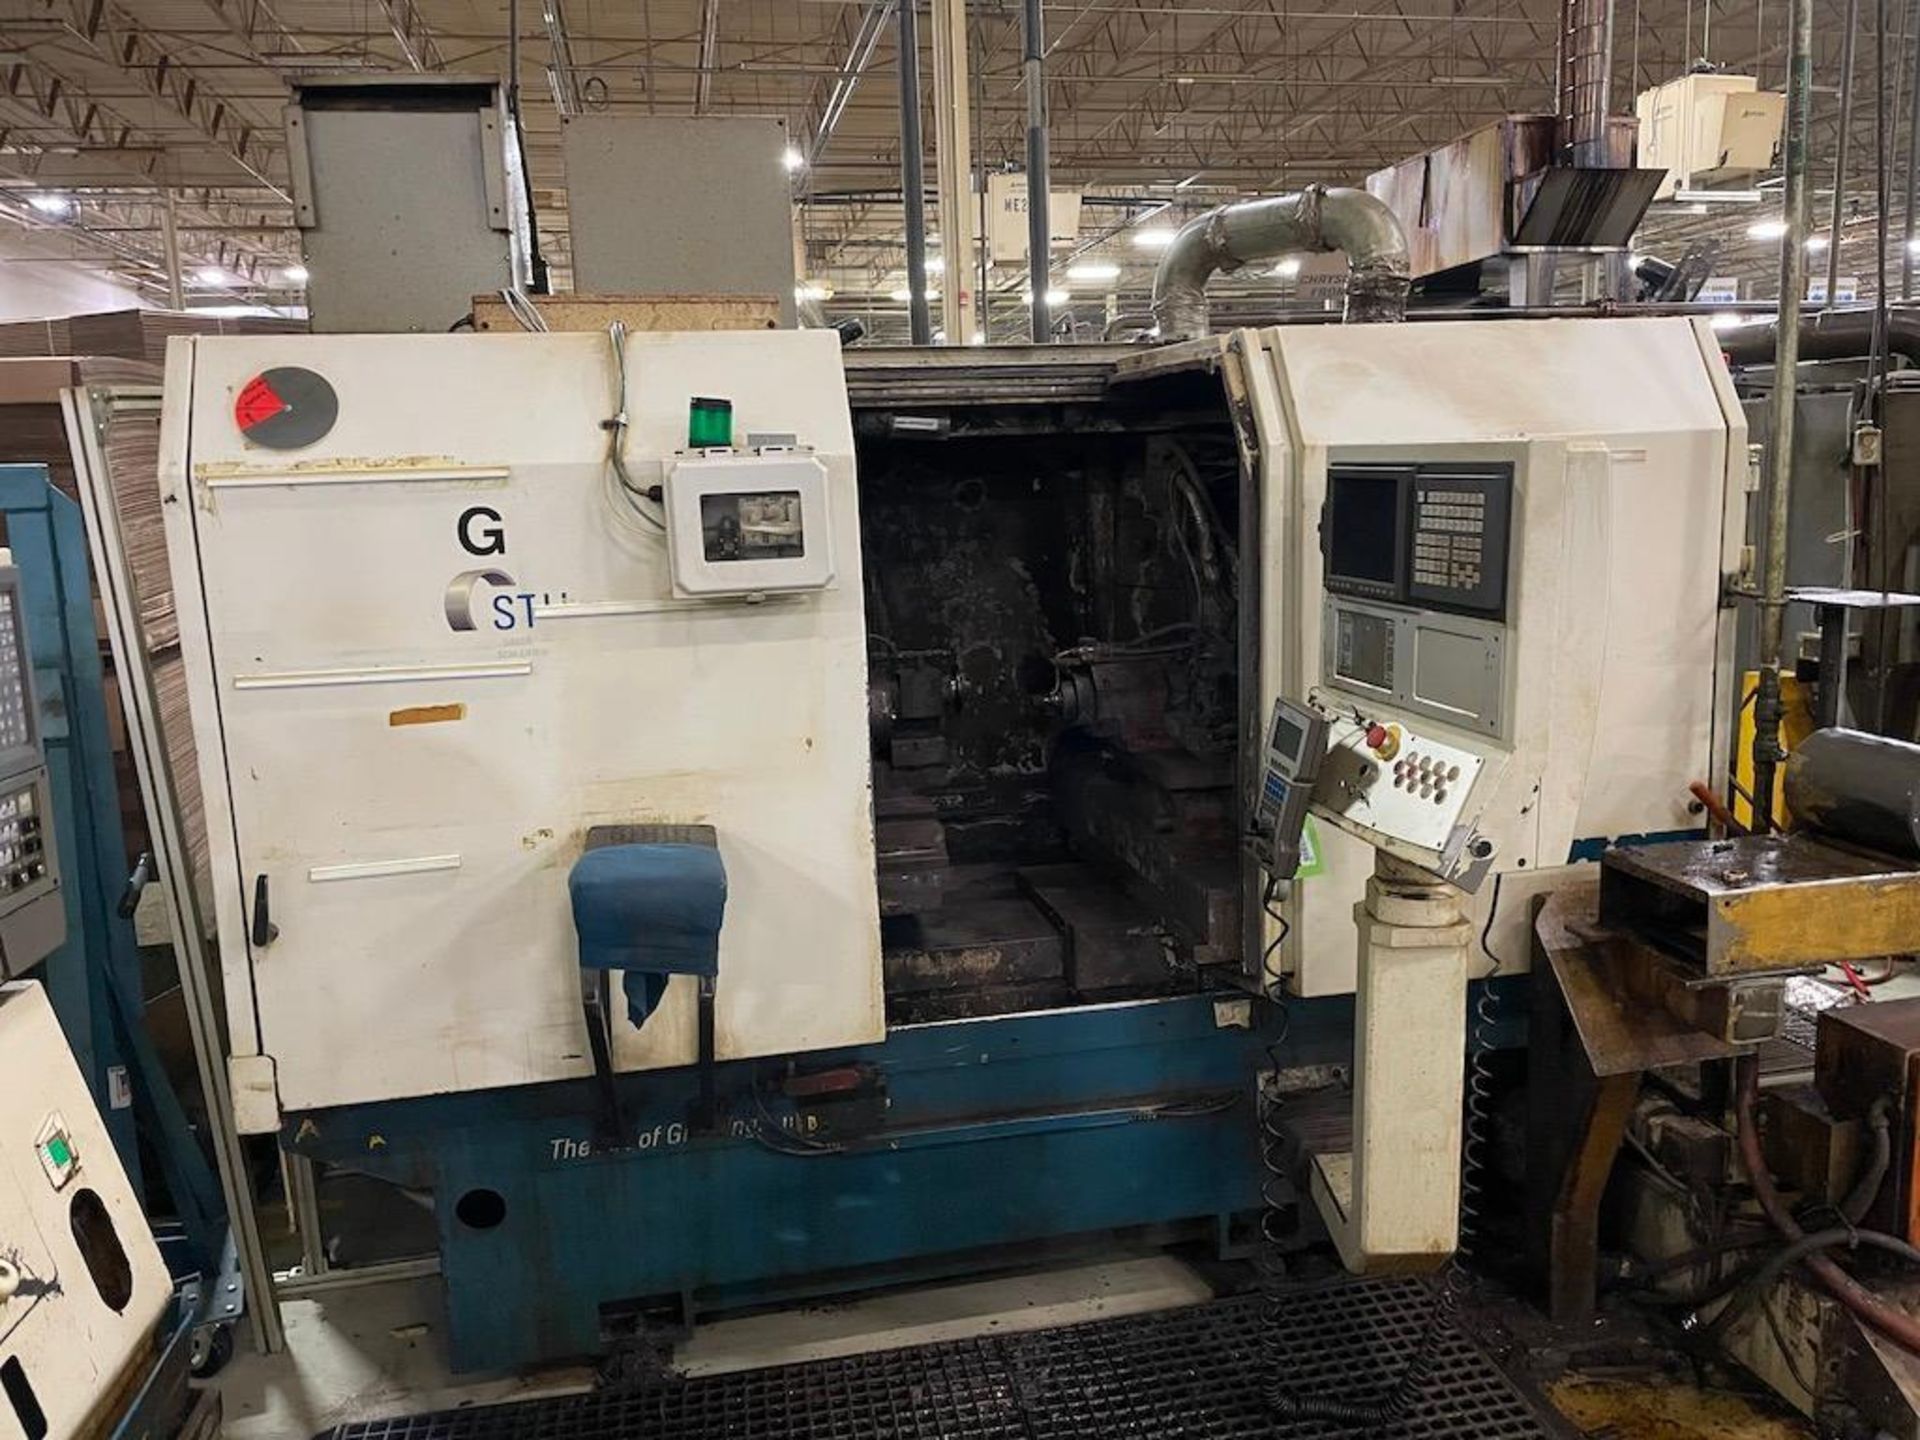 2006 STUDER CNC GRINDER, MODEL S151, HIGH FREQUENCY DRIVE SPINDLE, SWING 14.2INCH, TRAVEL-LONG 14.